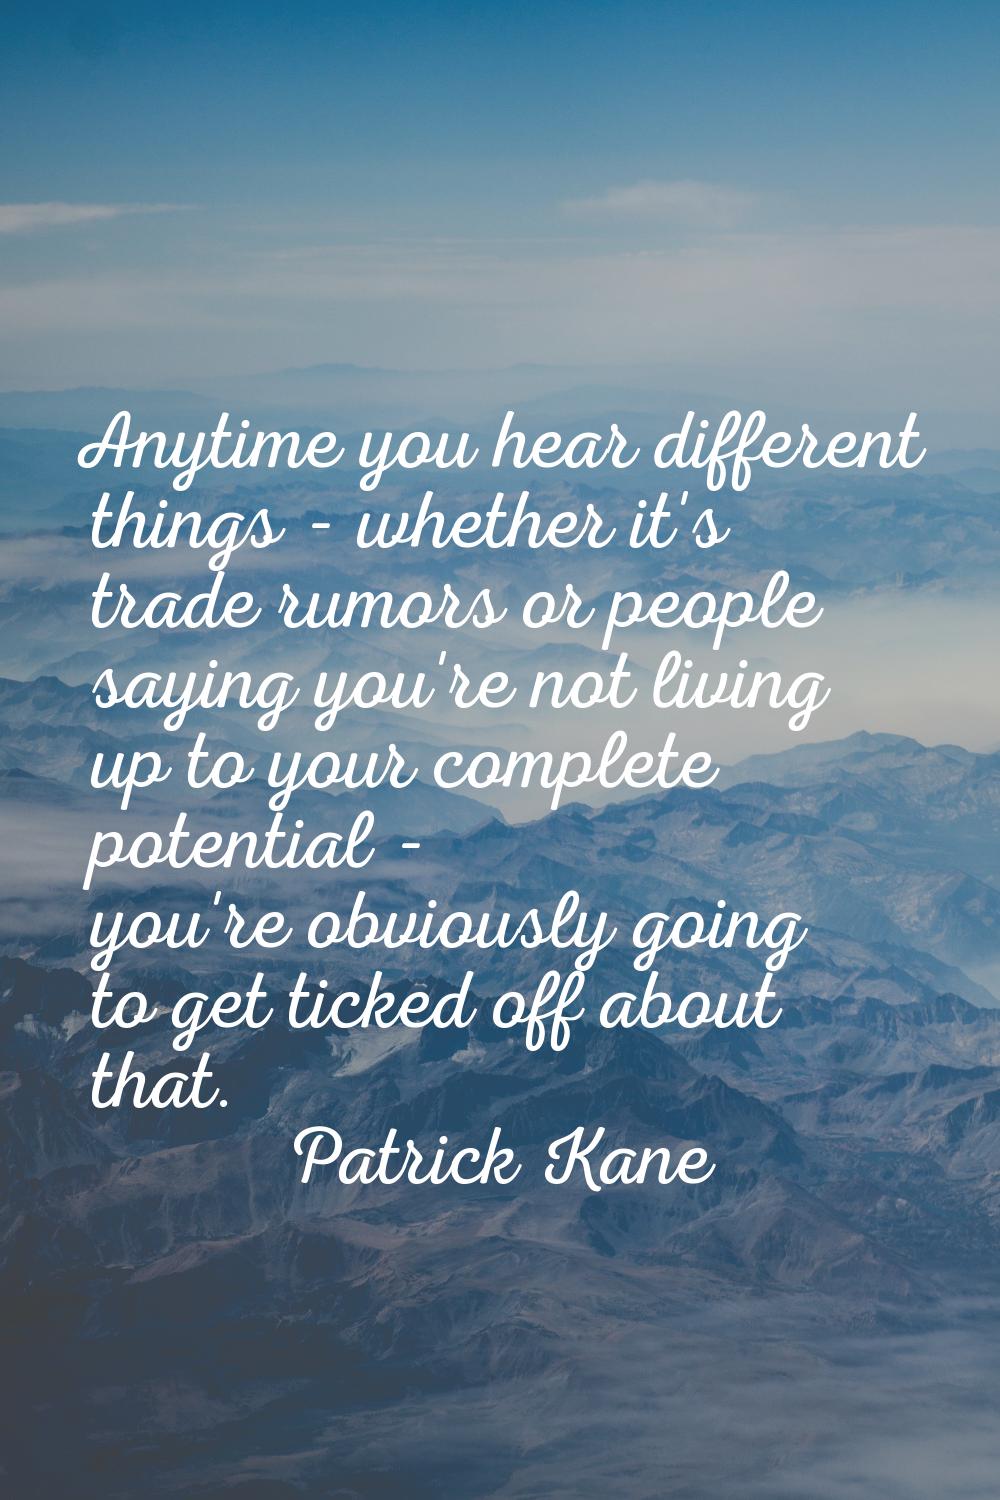 Anytime you hear different things - whether it's trade rumors or people saying you're not living up